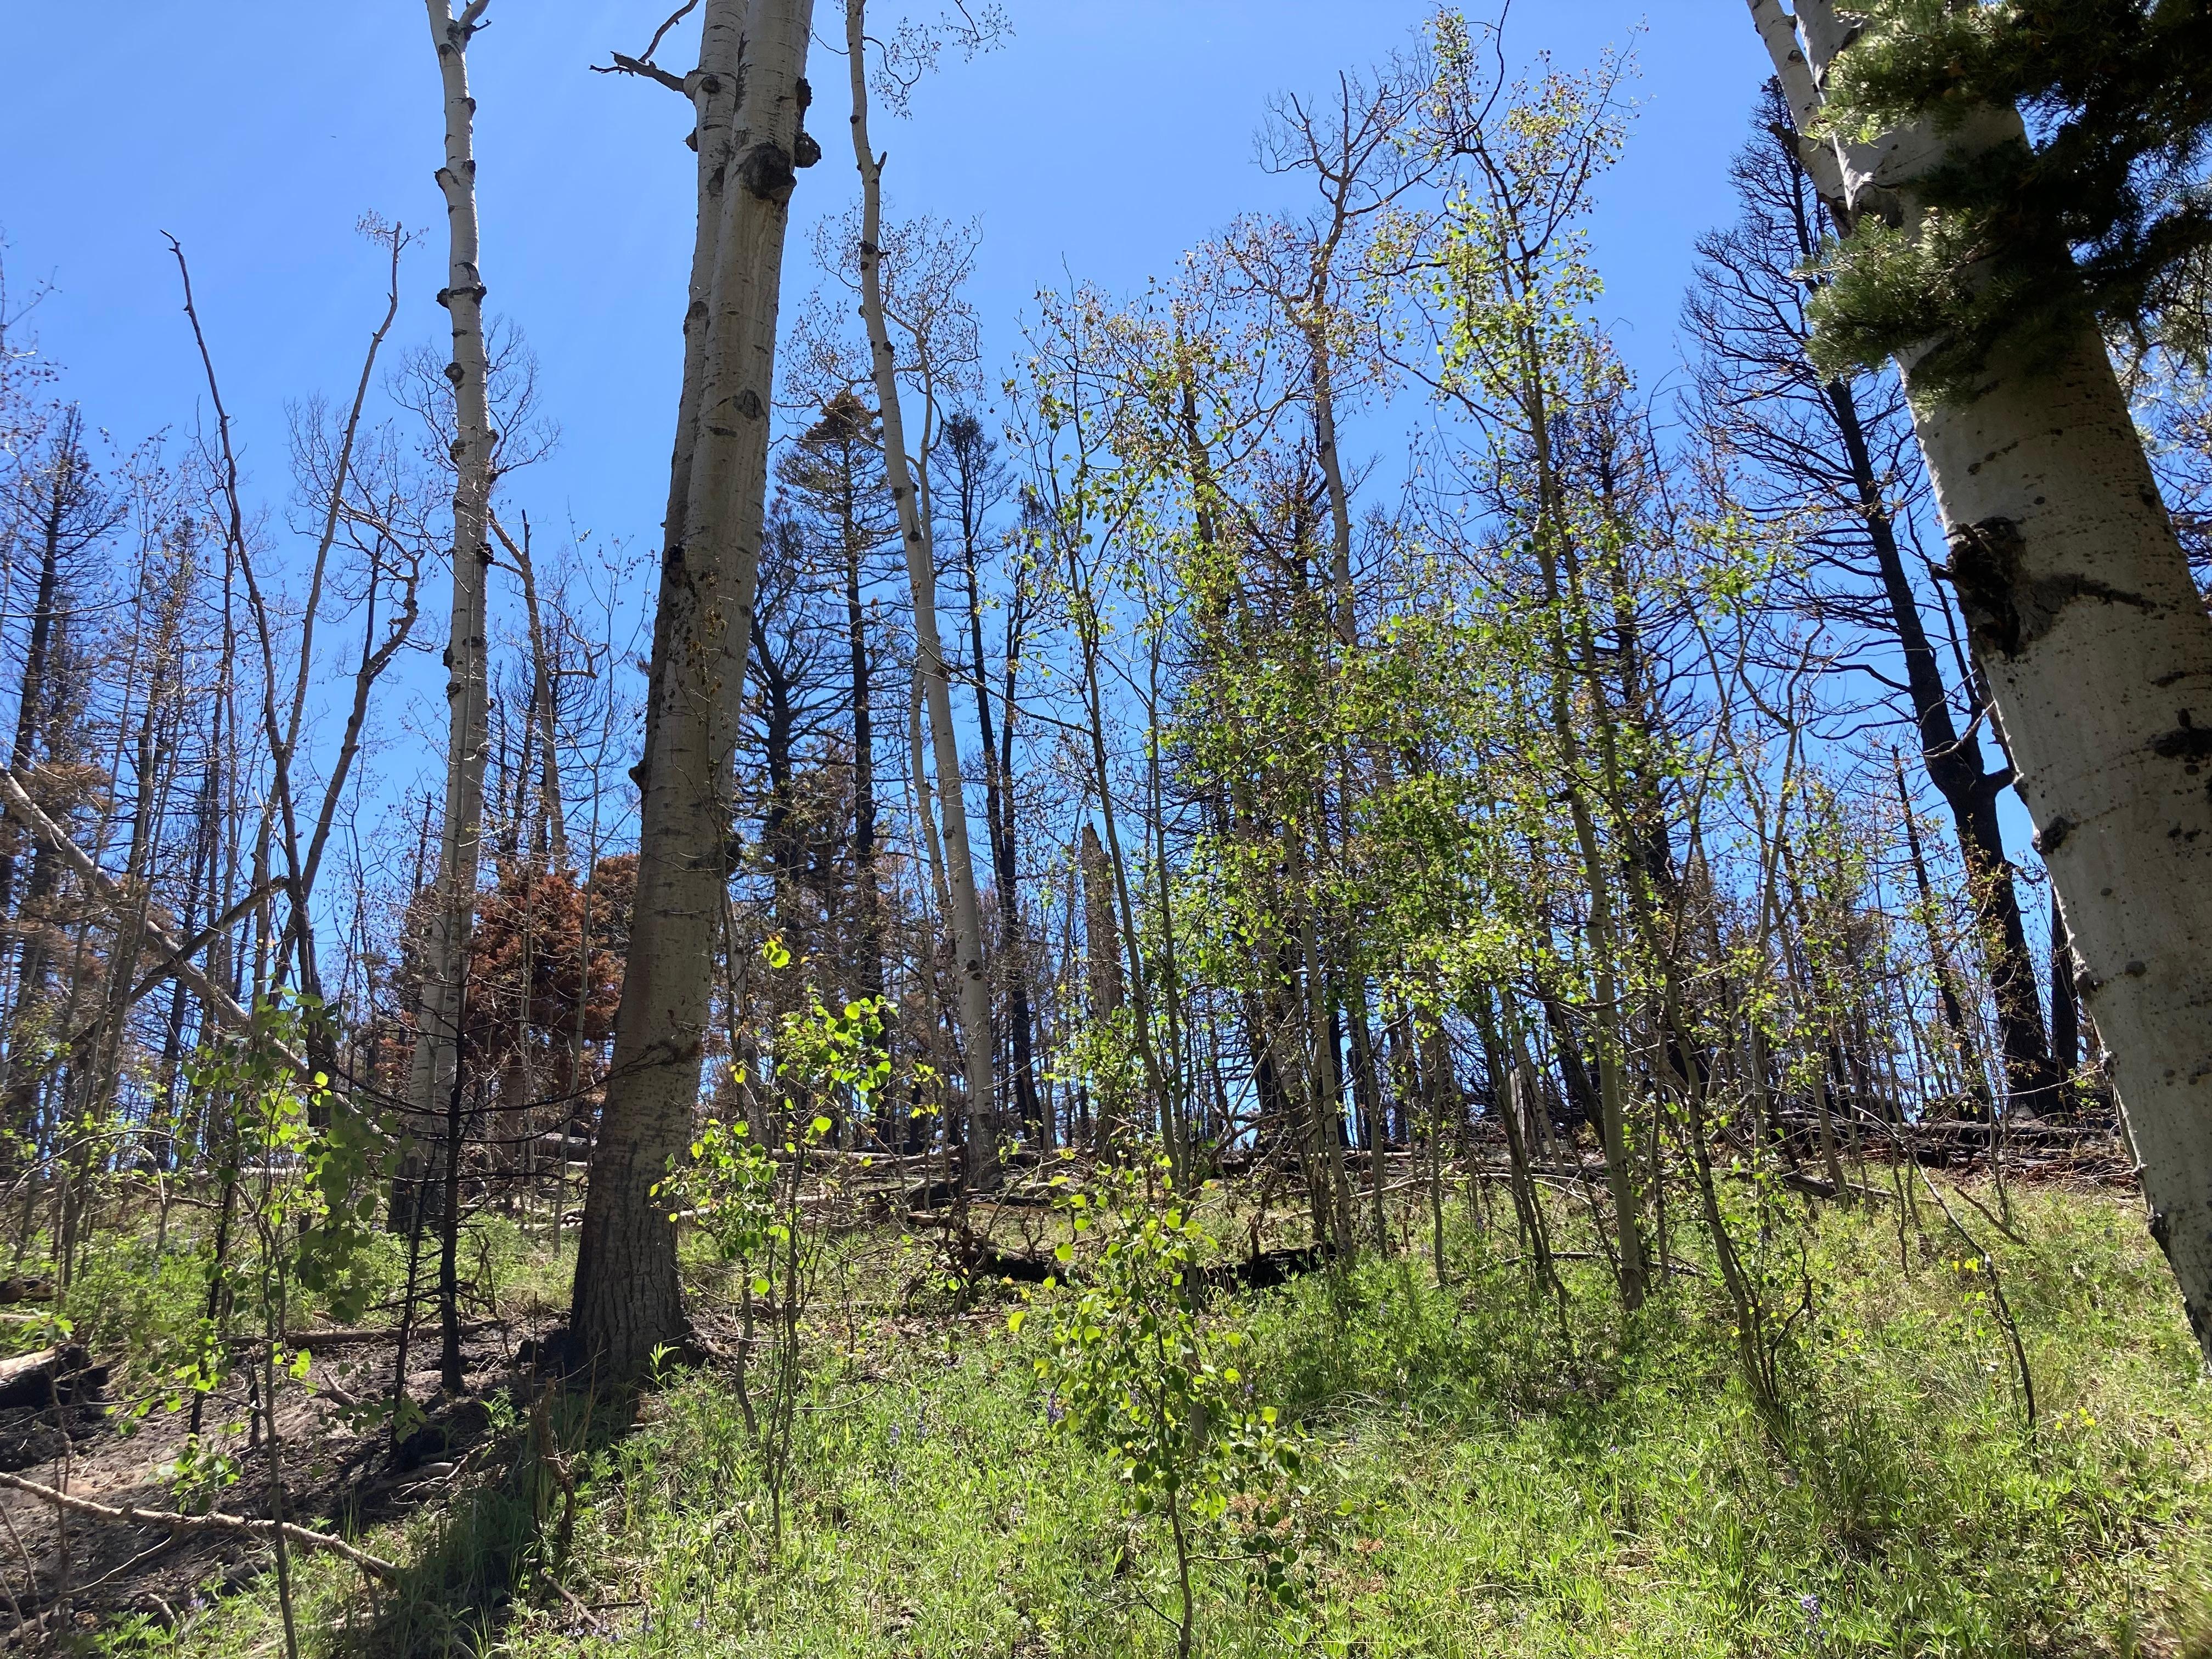 Small aspen trees in the foreground with green grass contrast with burned trees behind.